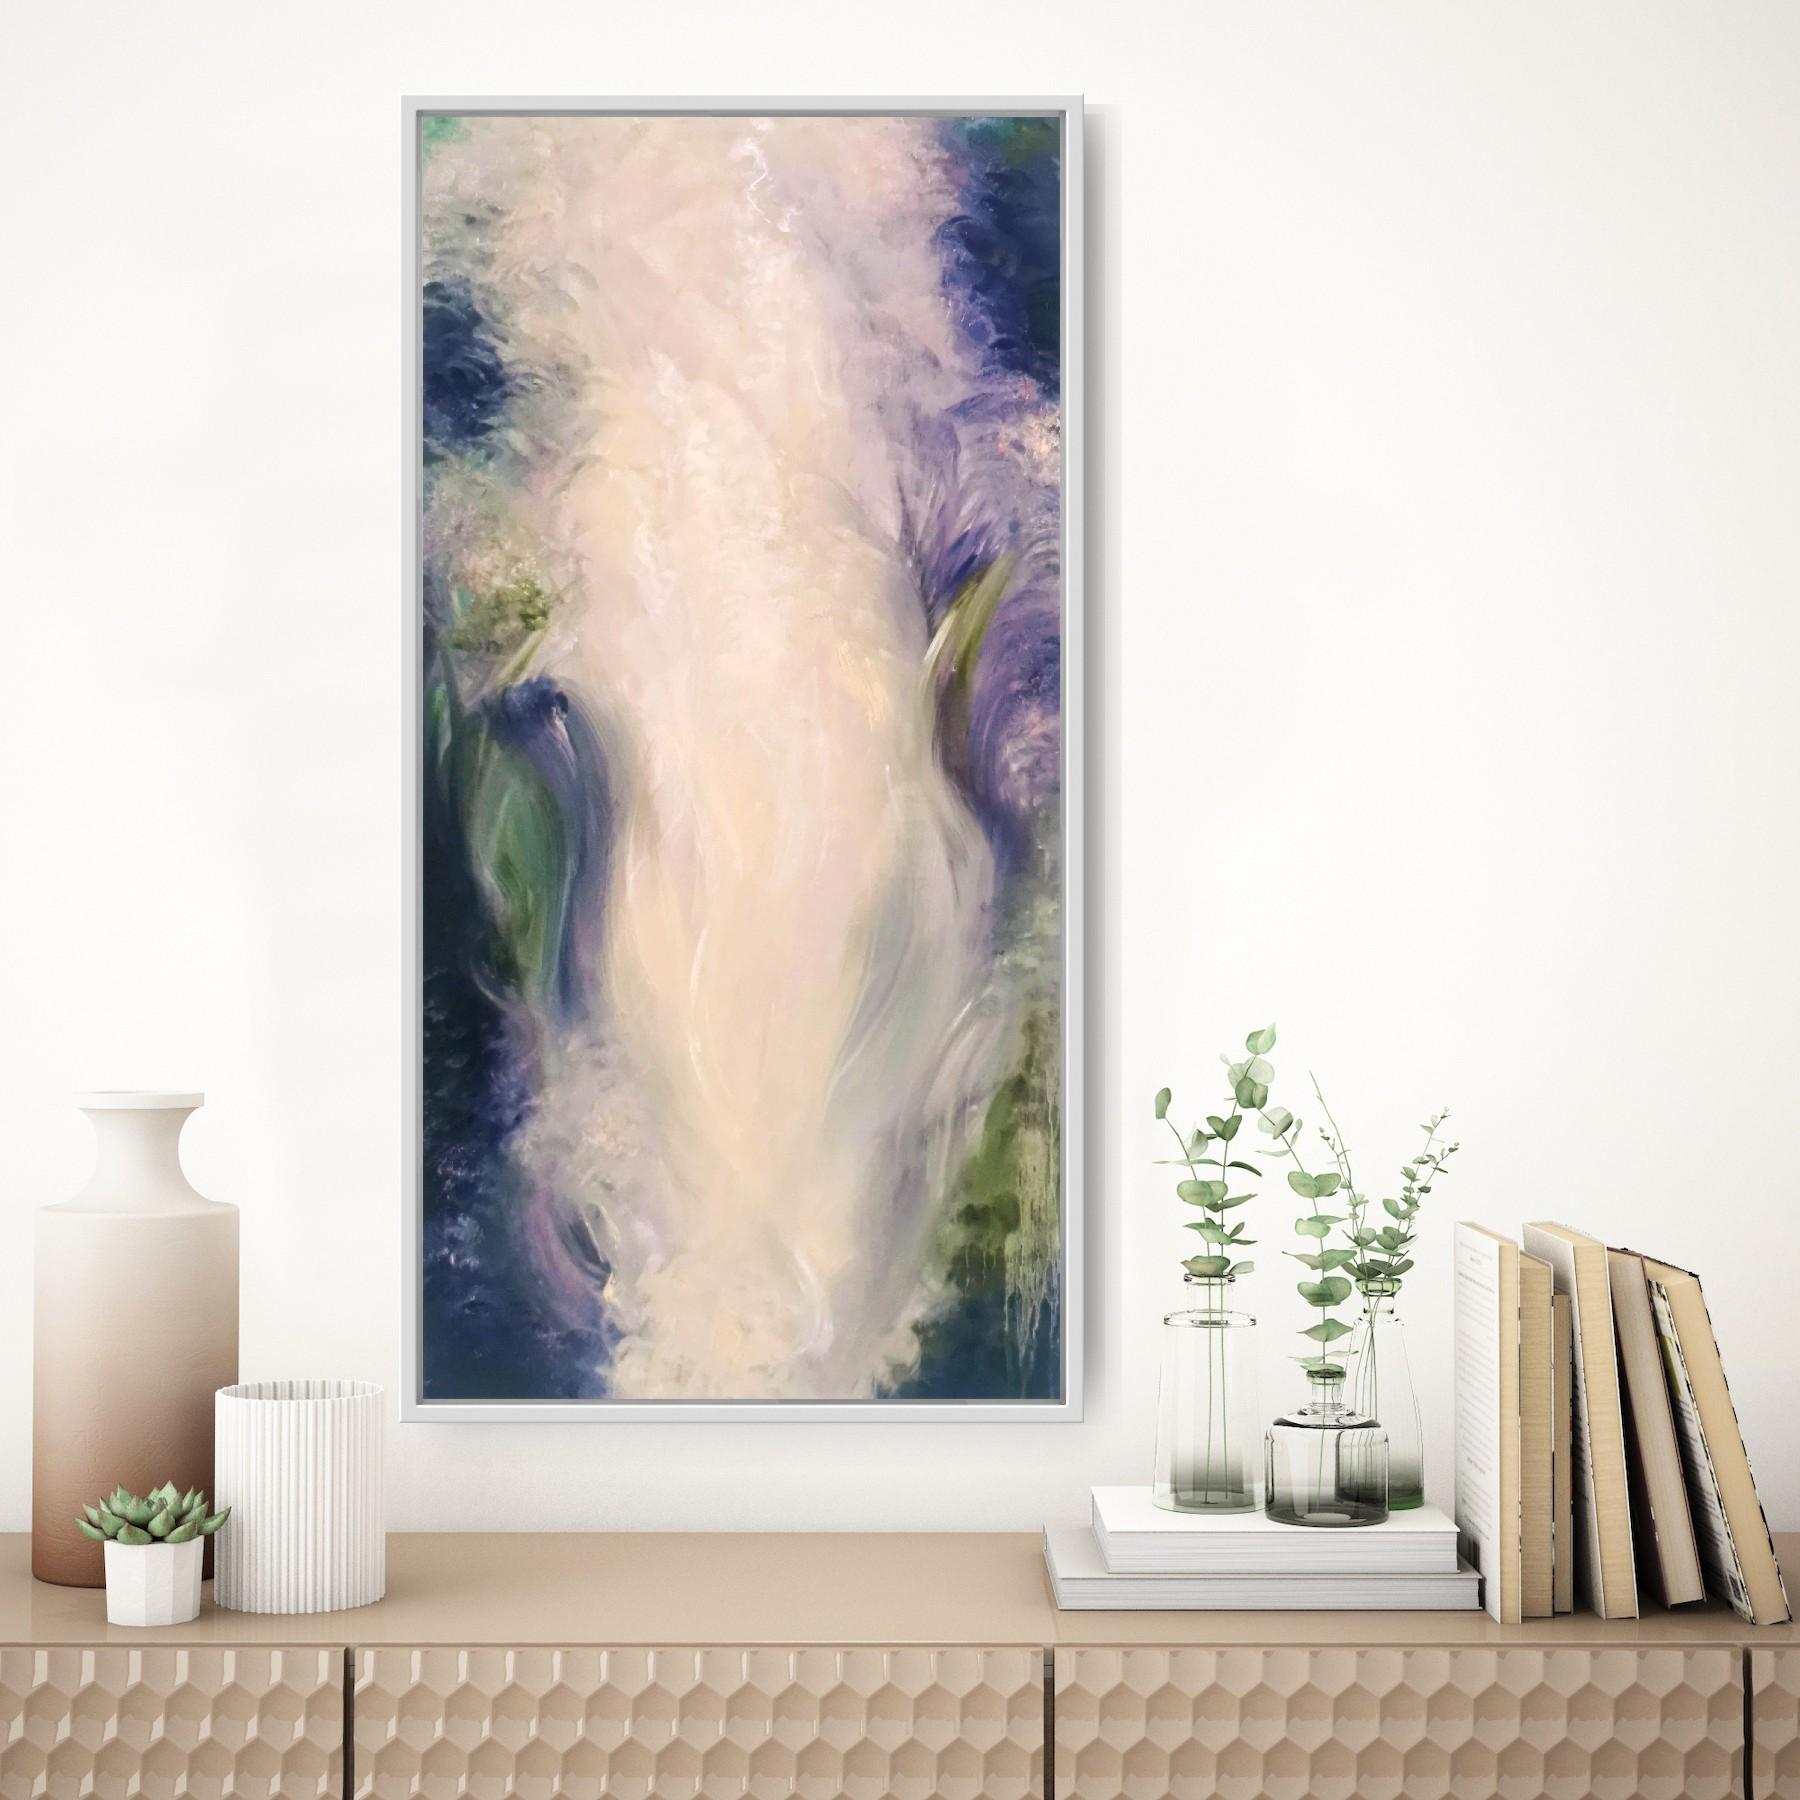 In my creation, I sought to capture the ephemeral beauty of nature's dance. Using oil, I weaved an abstract tapestry, an expressionist representation of movement and energy. It's an impressionistic exploration of the the movement of water and